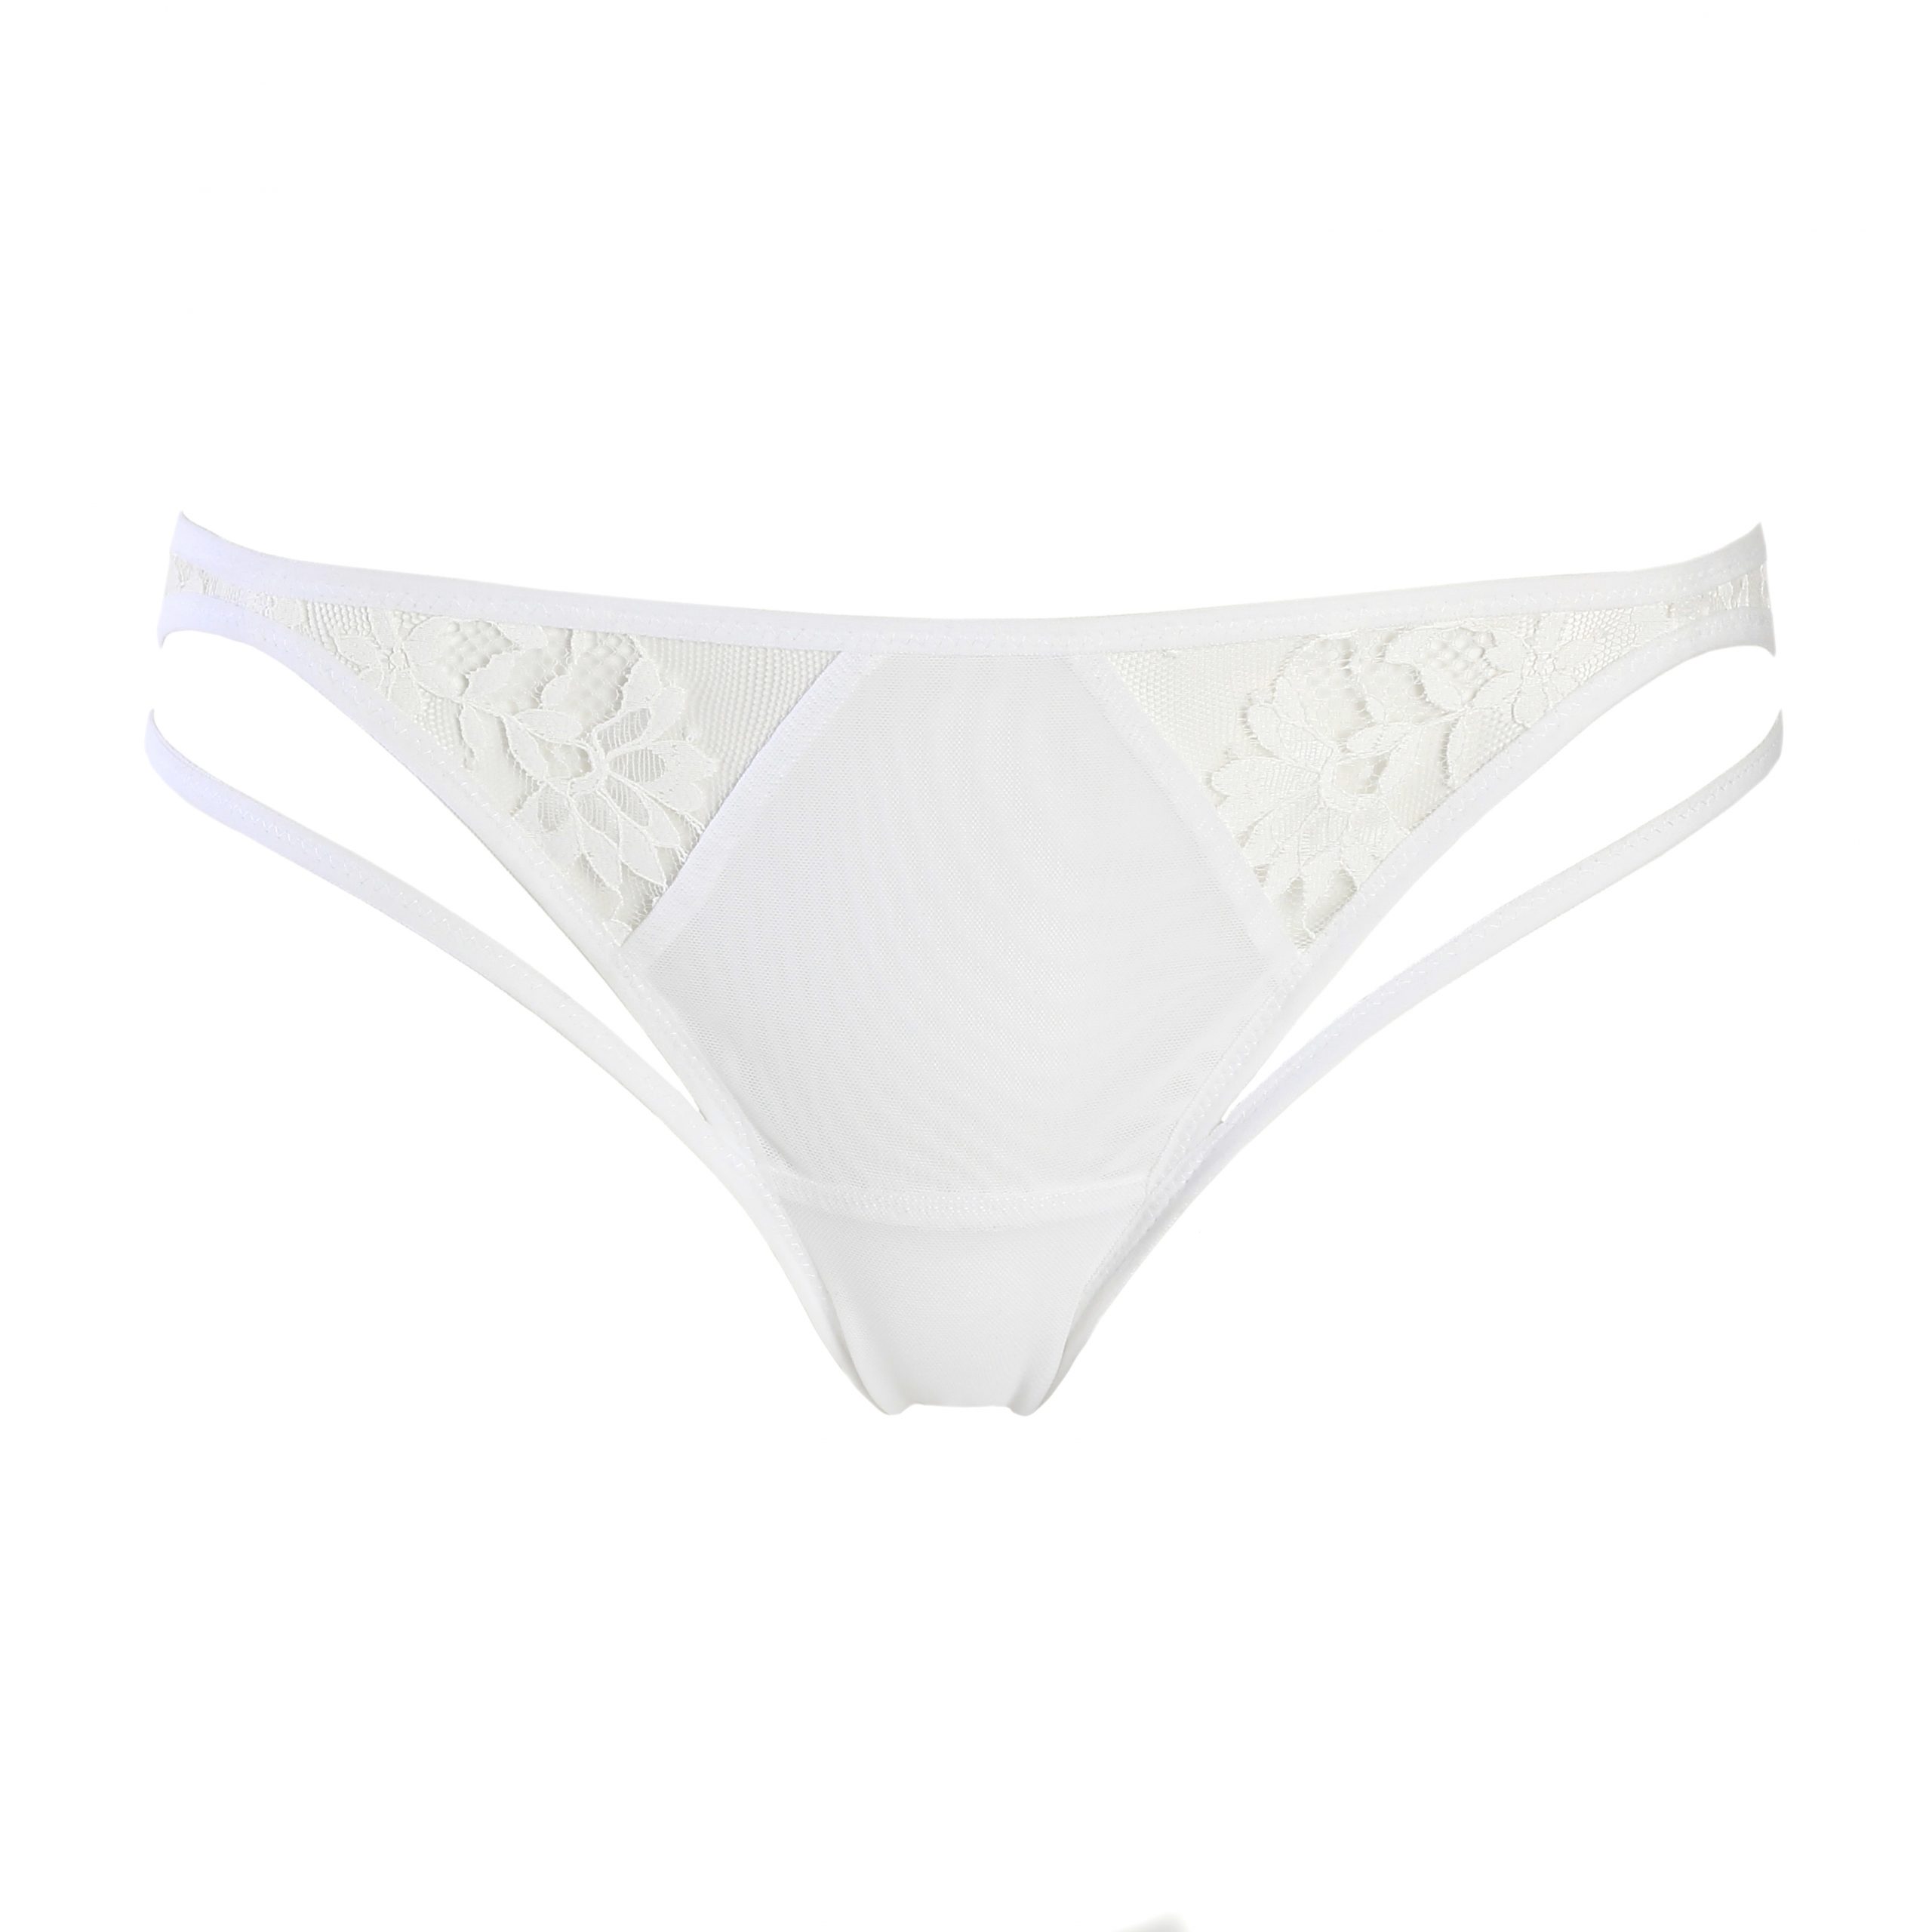 White Lace Mesh Thong, Lingerie